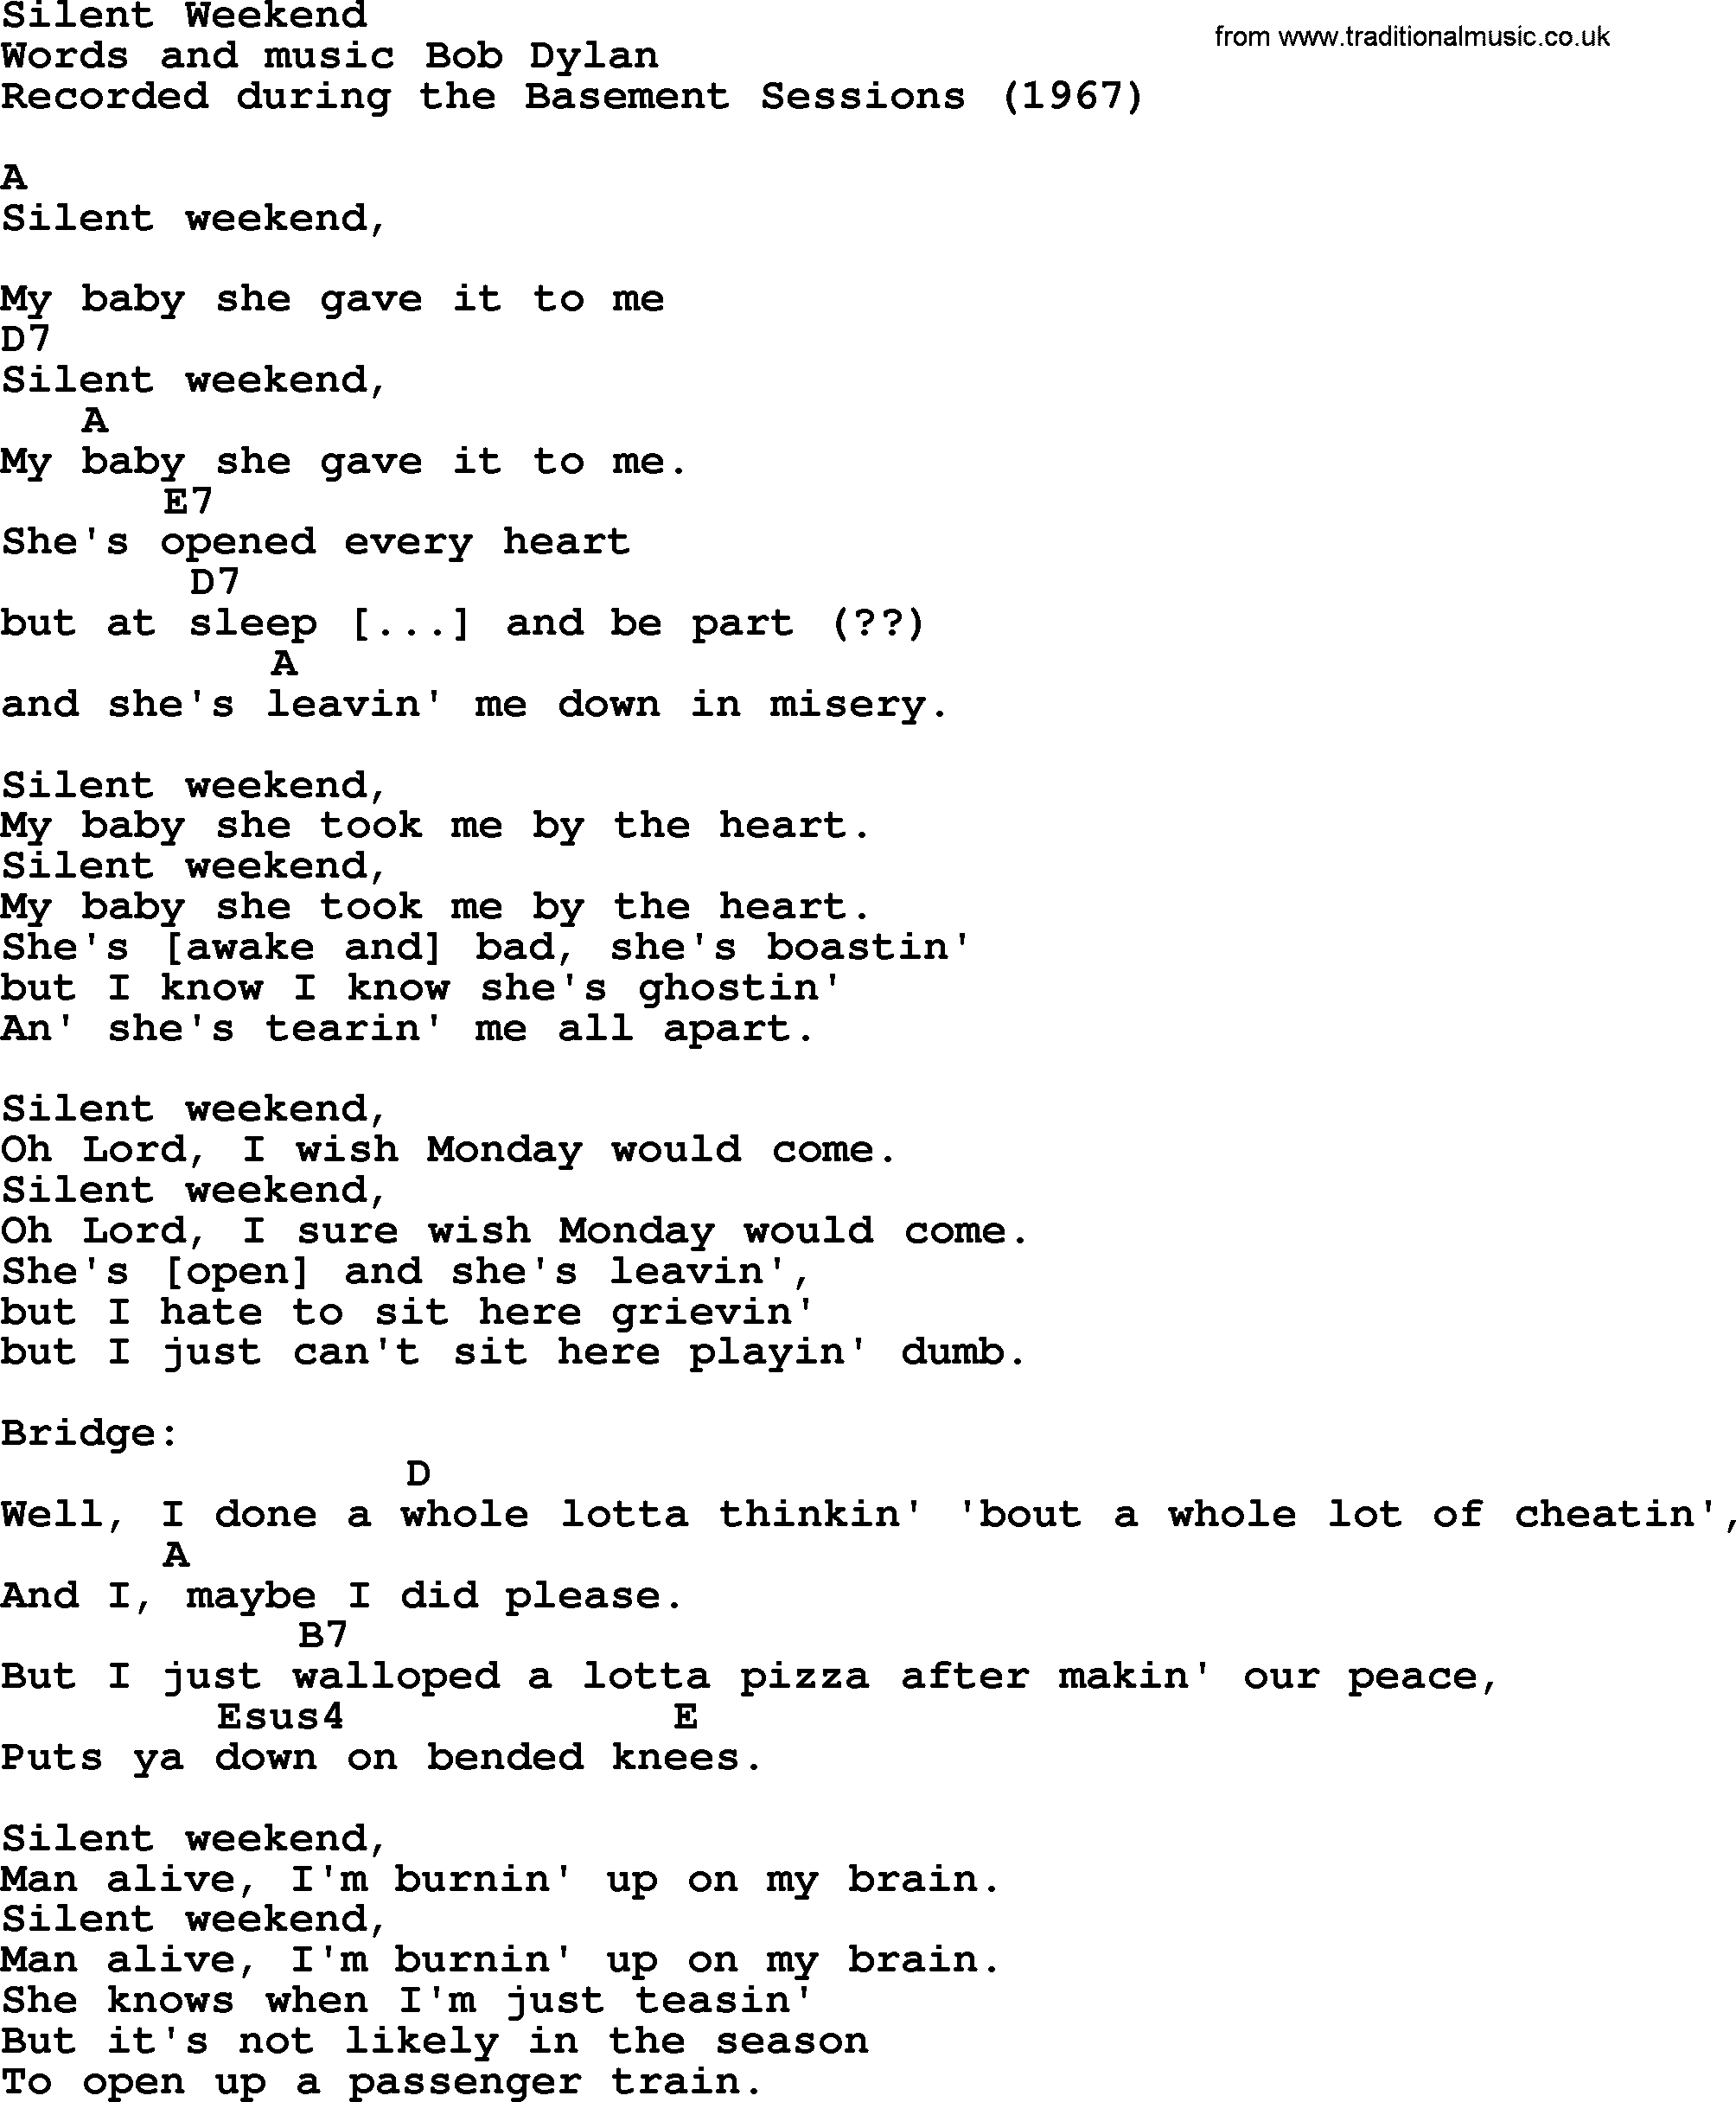 Bob Dylan song, lyrics with chords - Silent Weekend